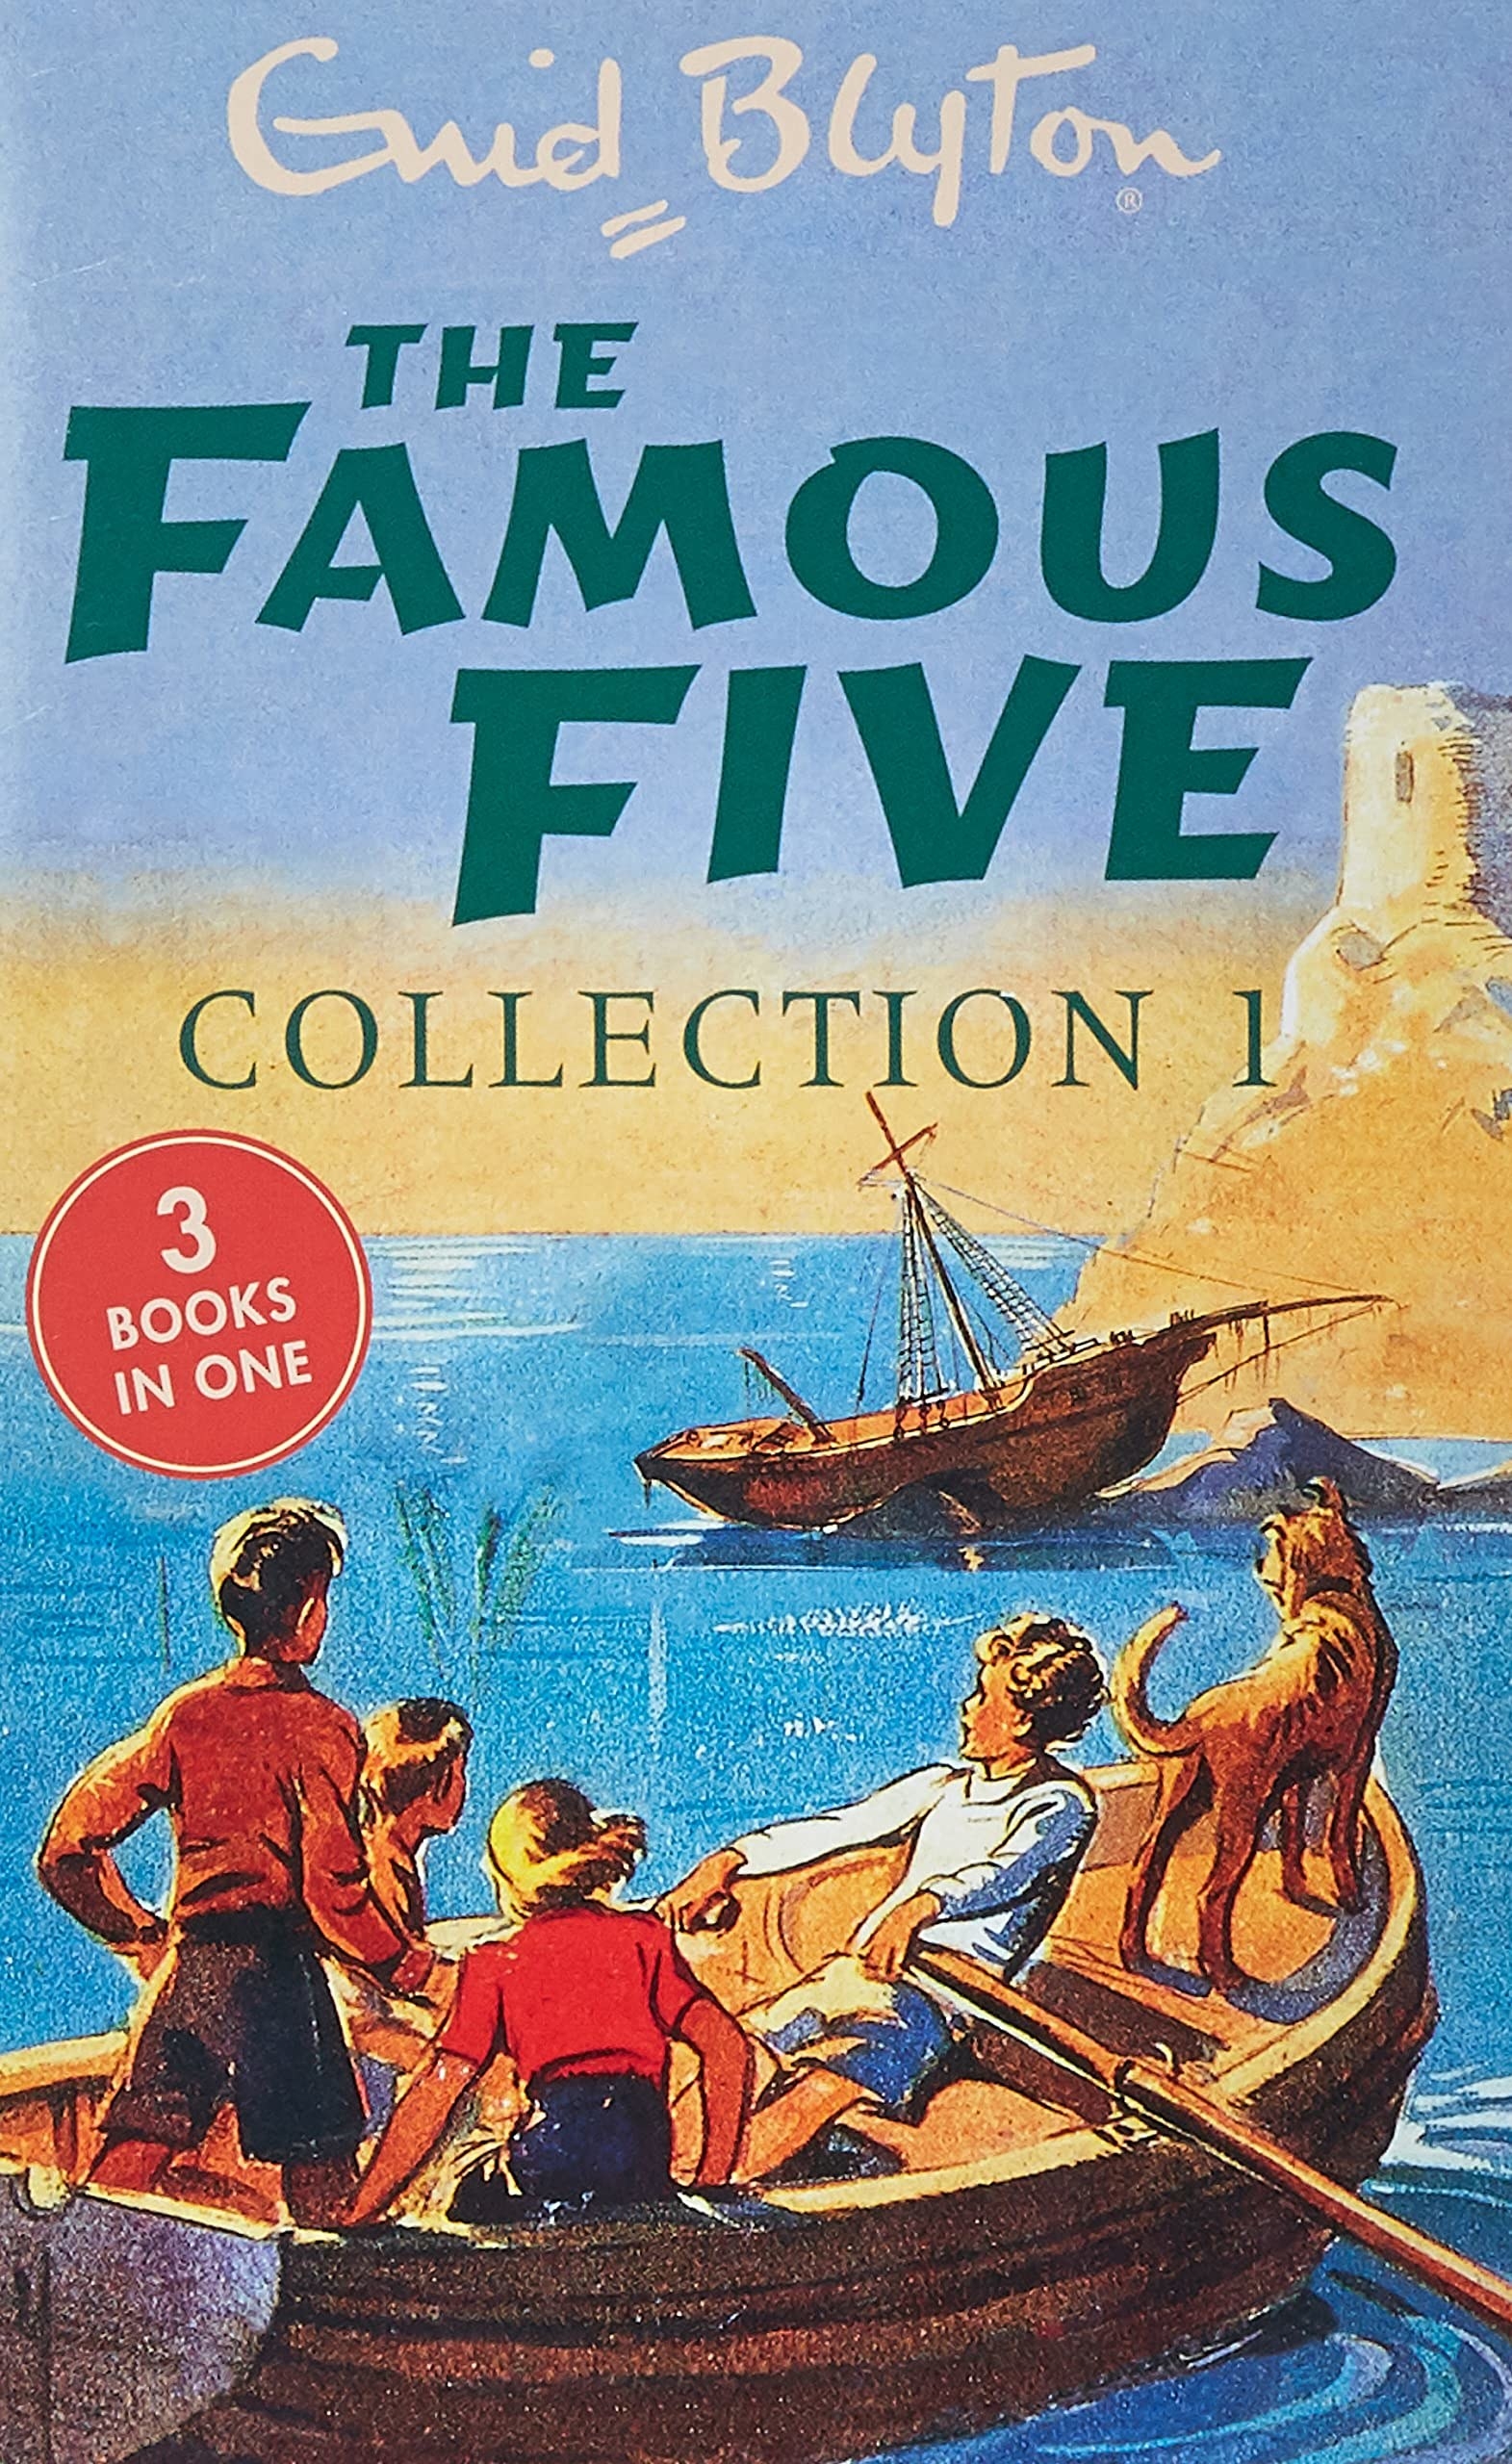 The Famous Five Collection 1 book cover